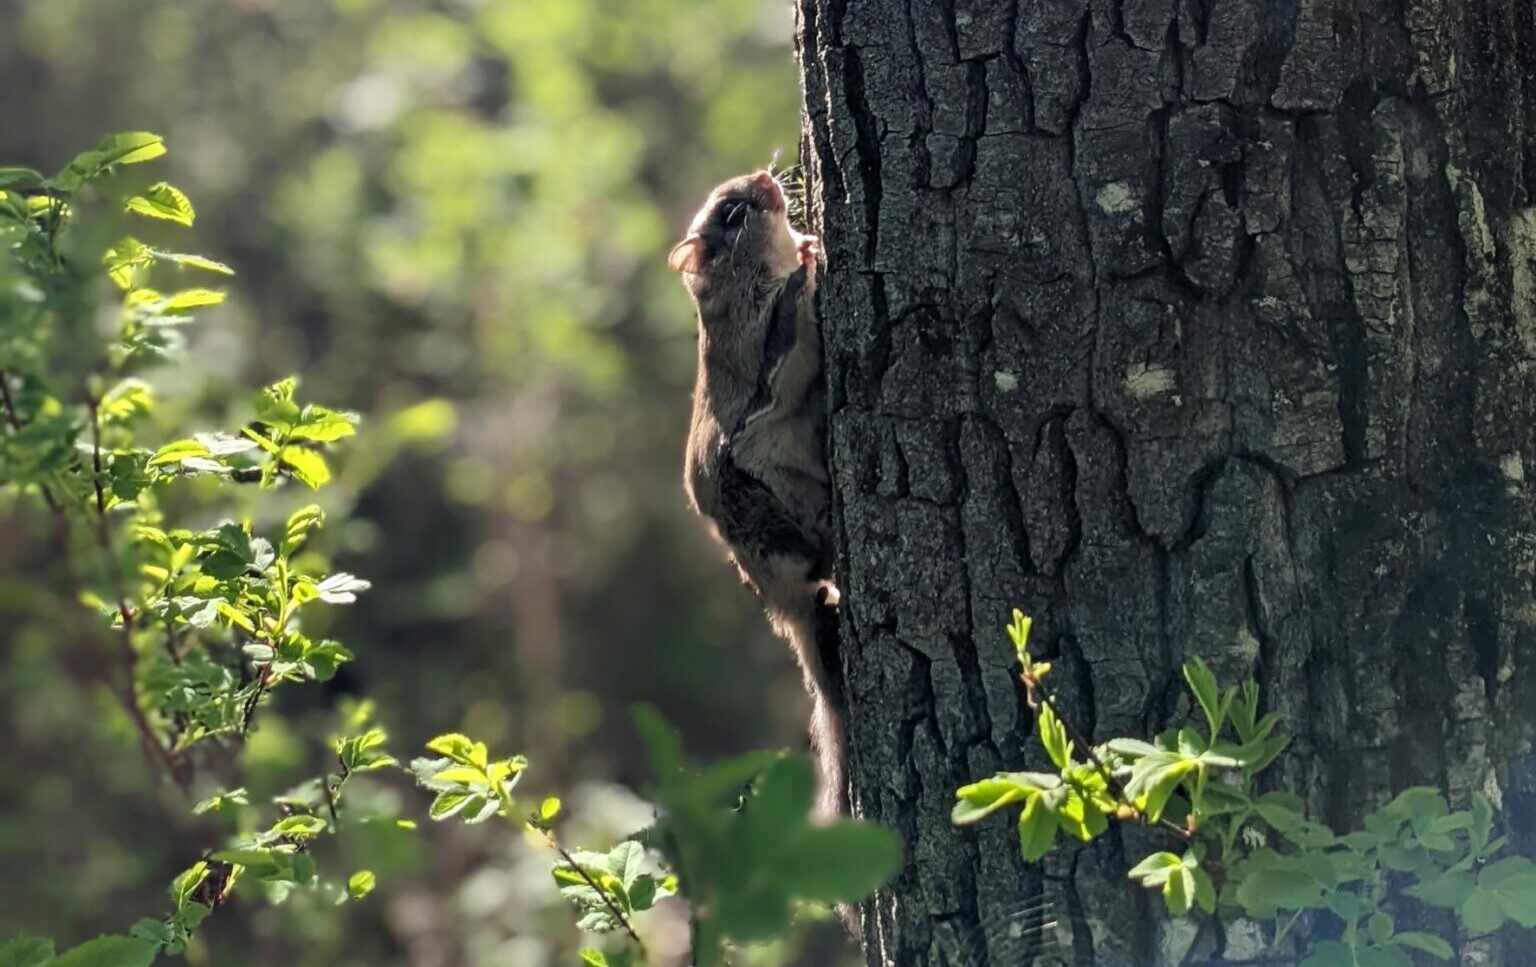 Northern flying squirrel on tree trunk